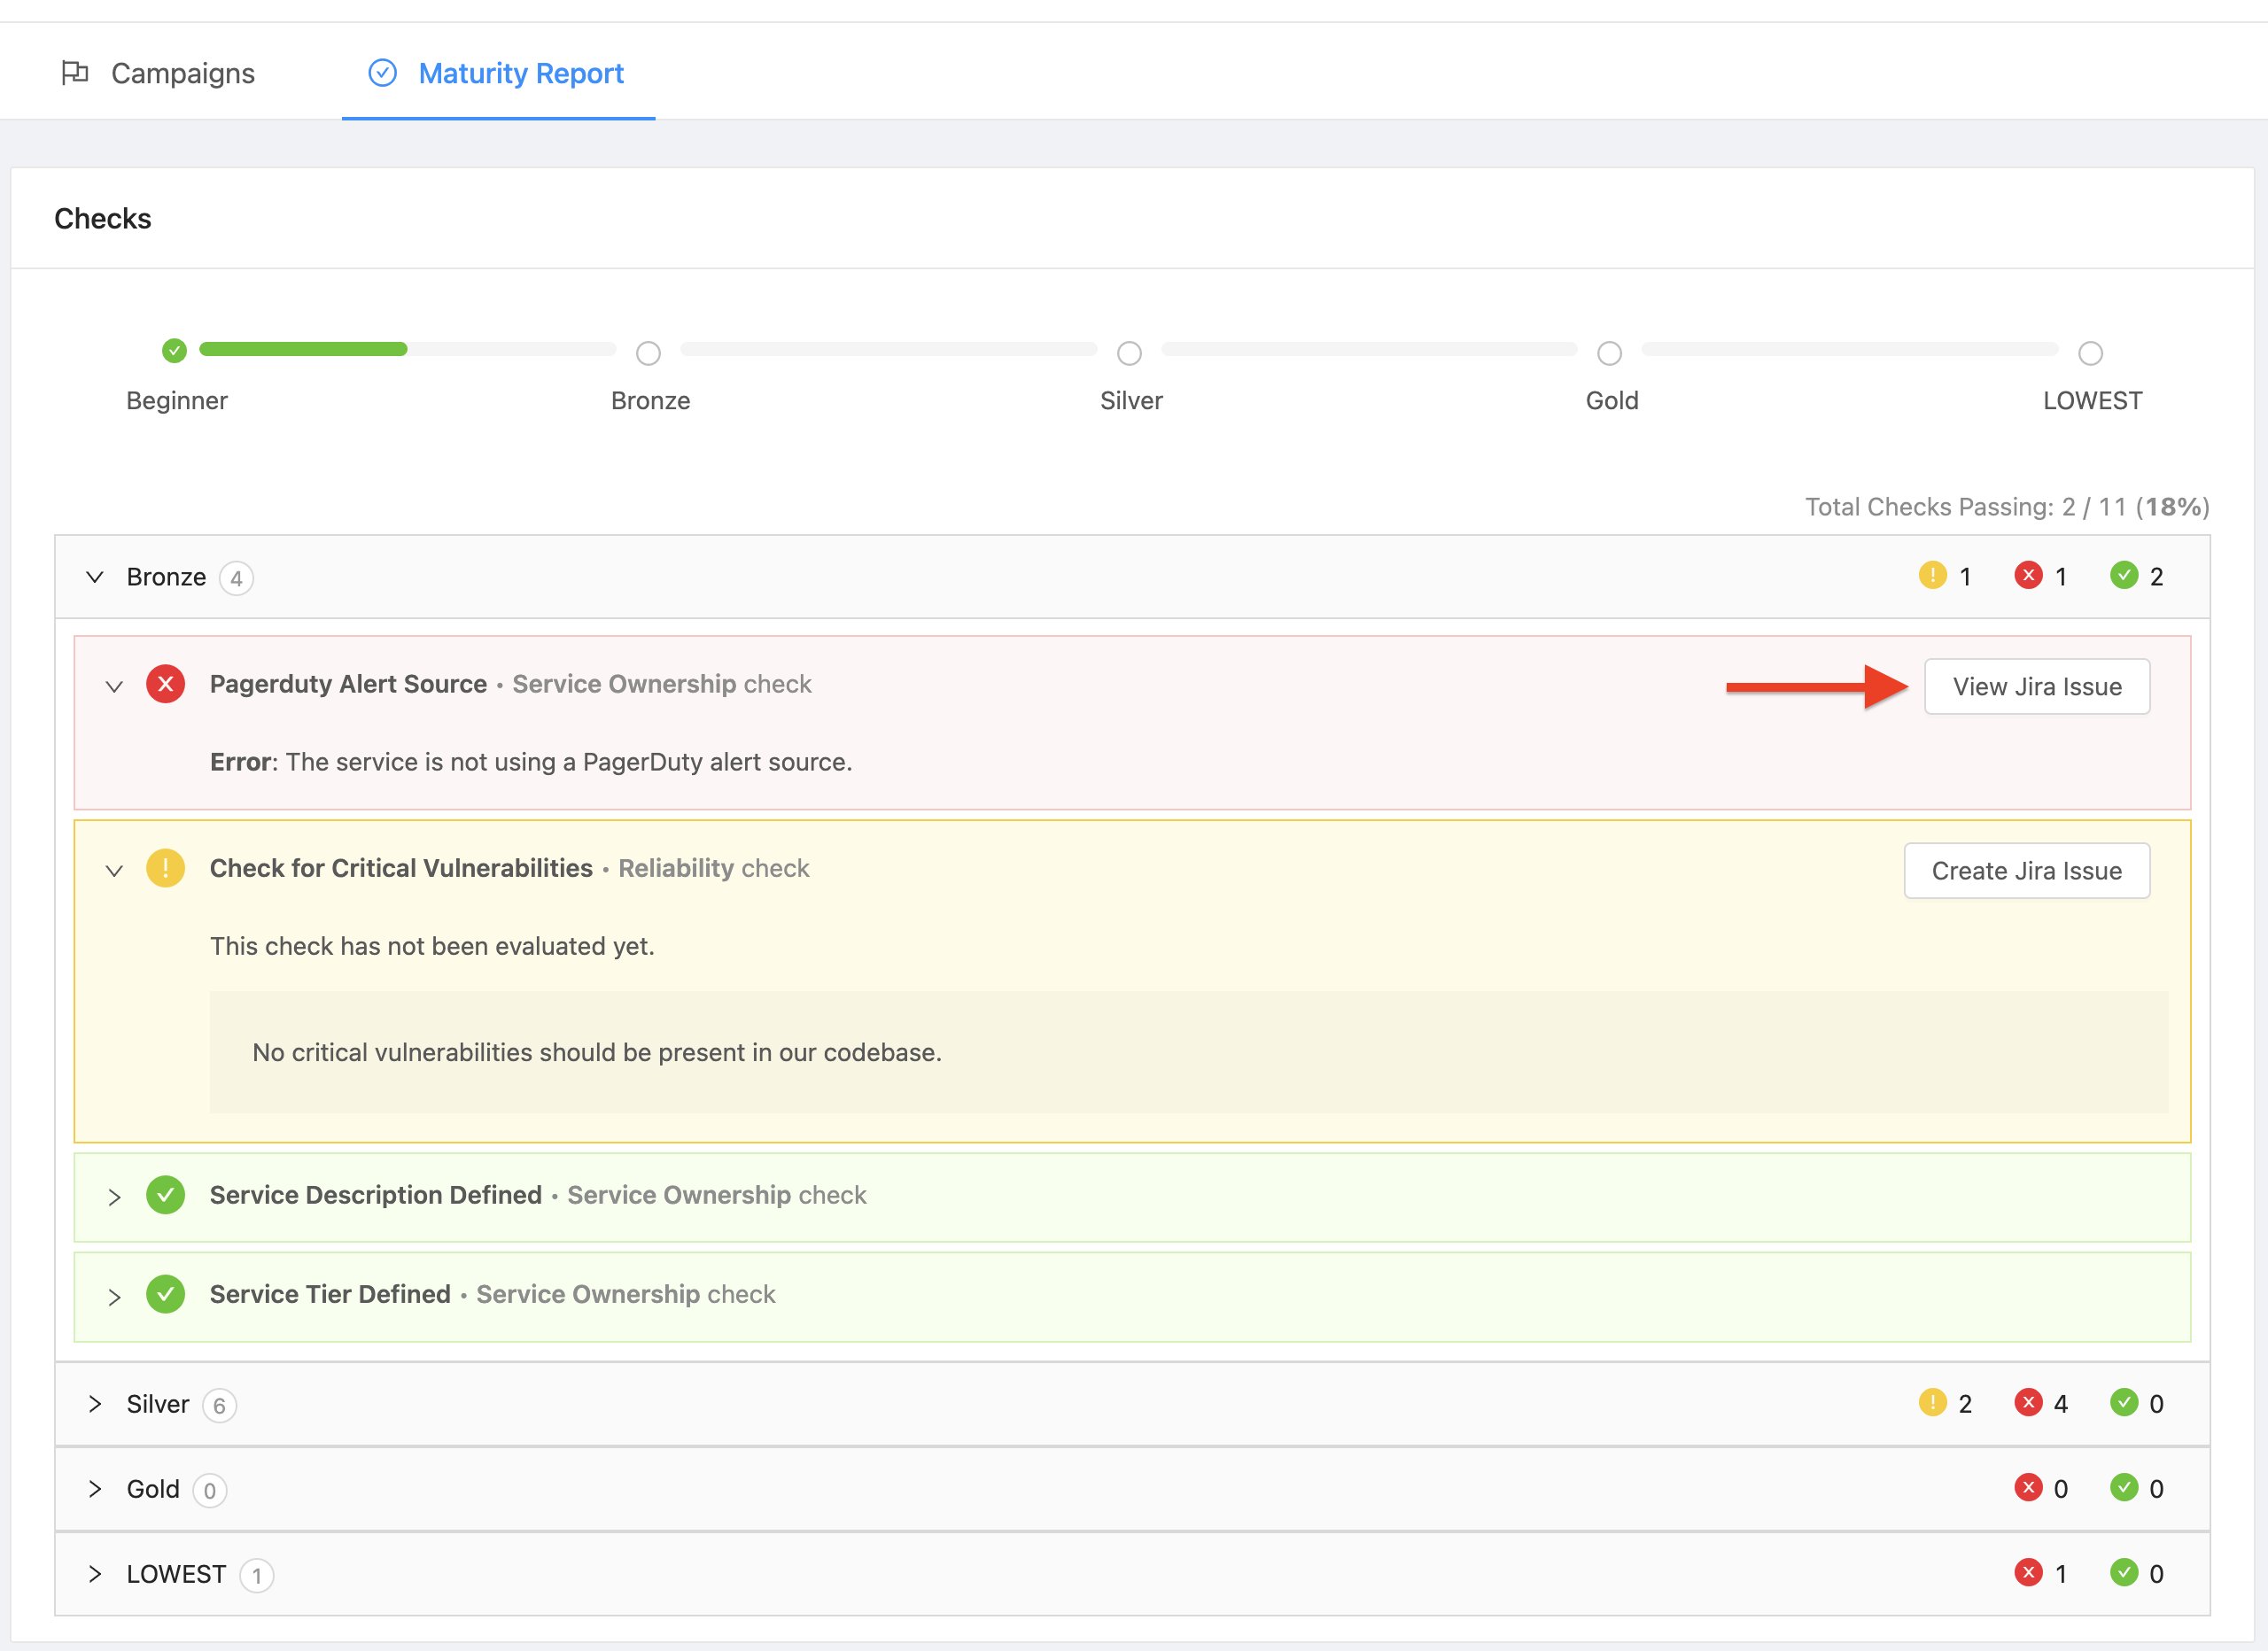 Jira View Issue Button in Service Maturity Report